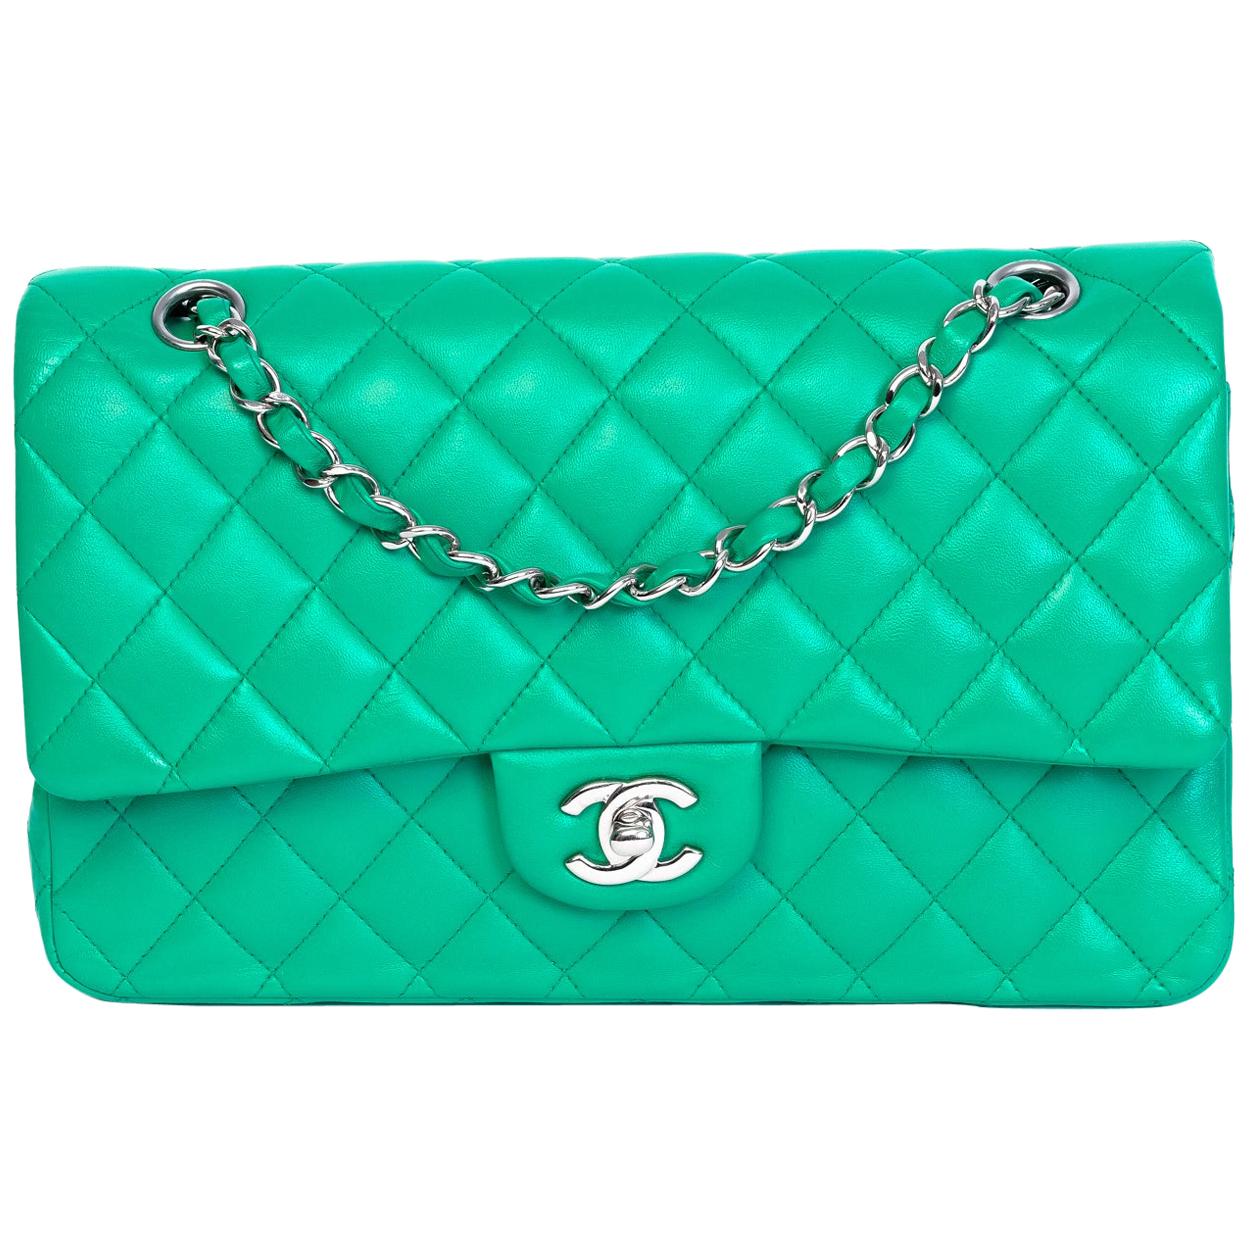 Chanel Green Quilted Lambskin Leather Medium Classic Double Flap